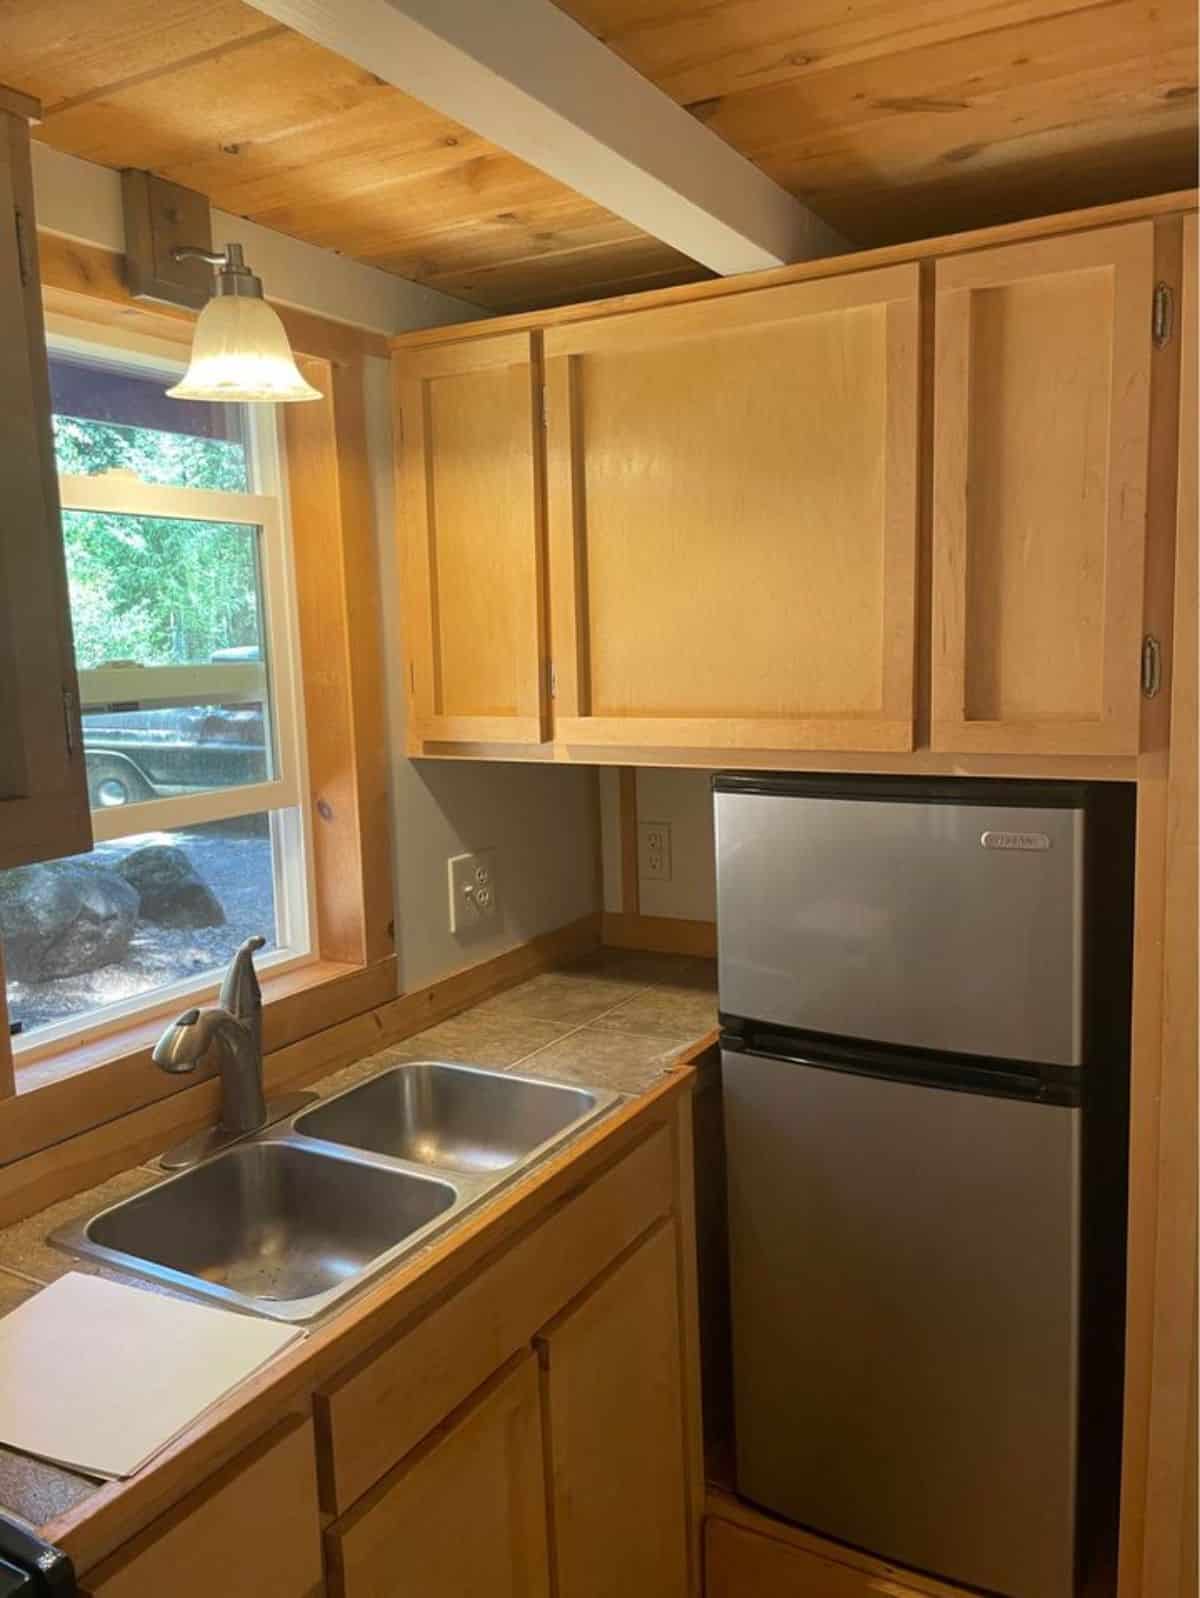 Countertop in kitchen of 27’ Tiny House With Two Lofts